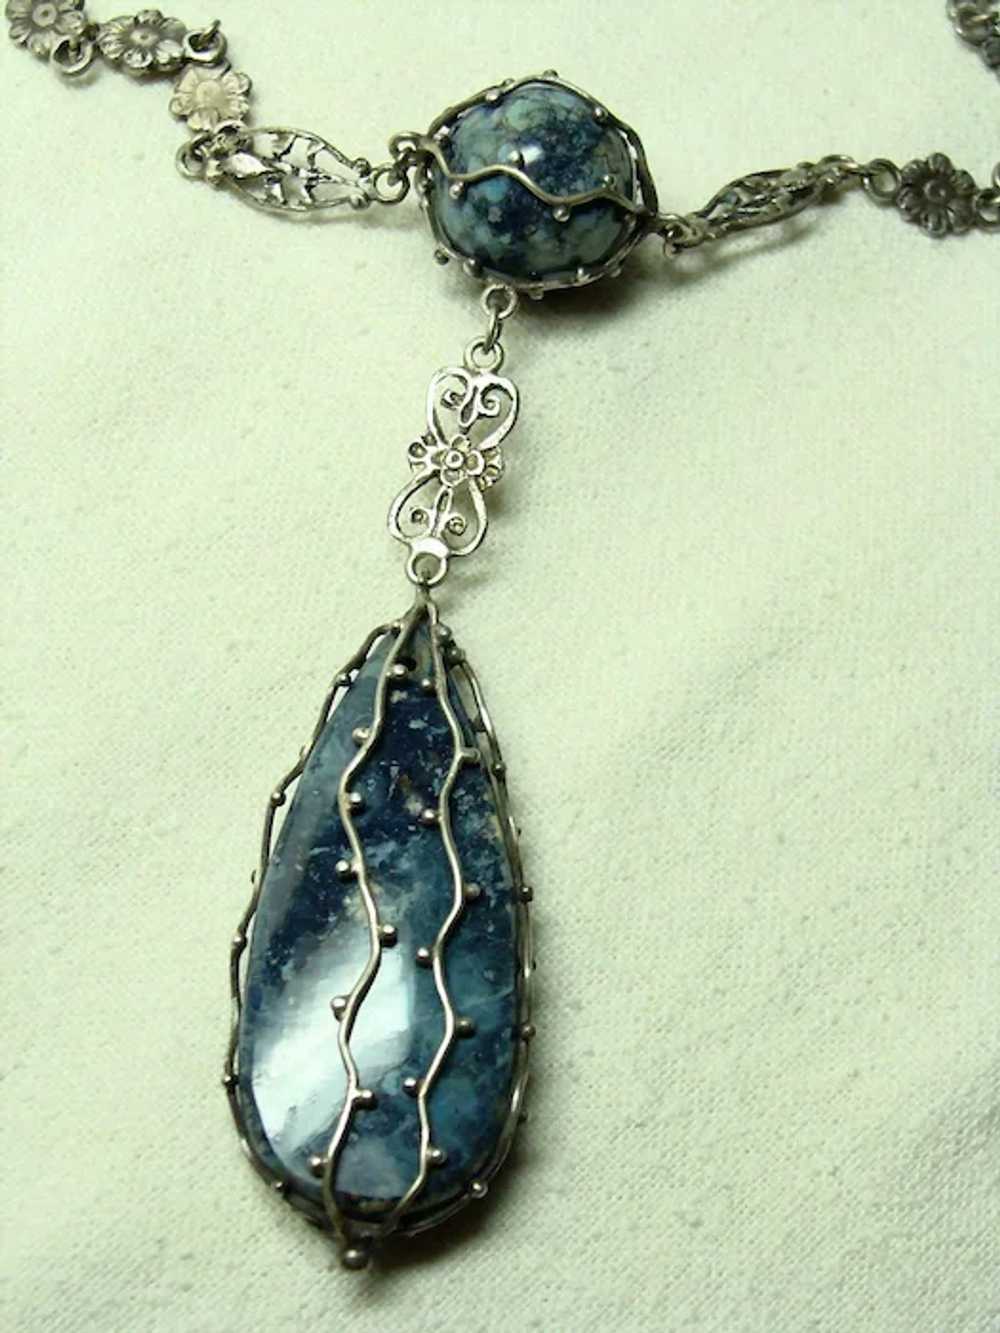 Vintage Arts and Crafts Sodalite Necklace - image 2